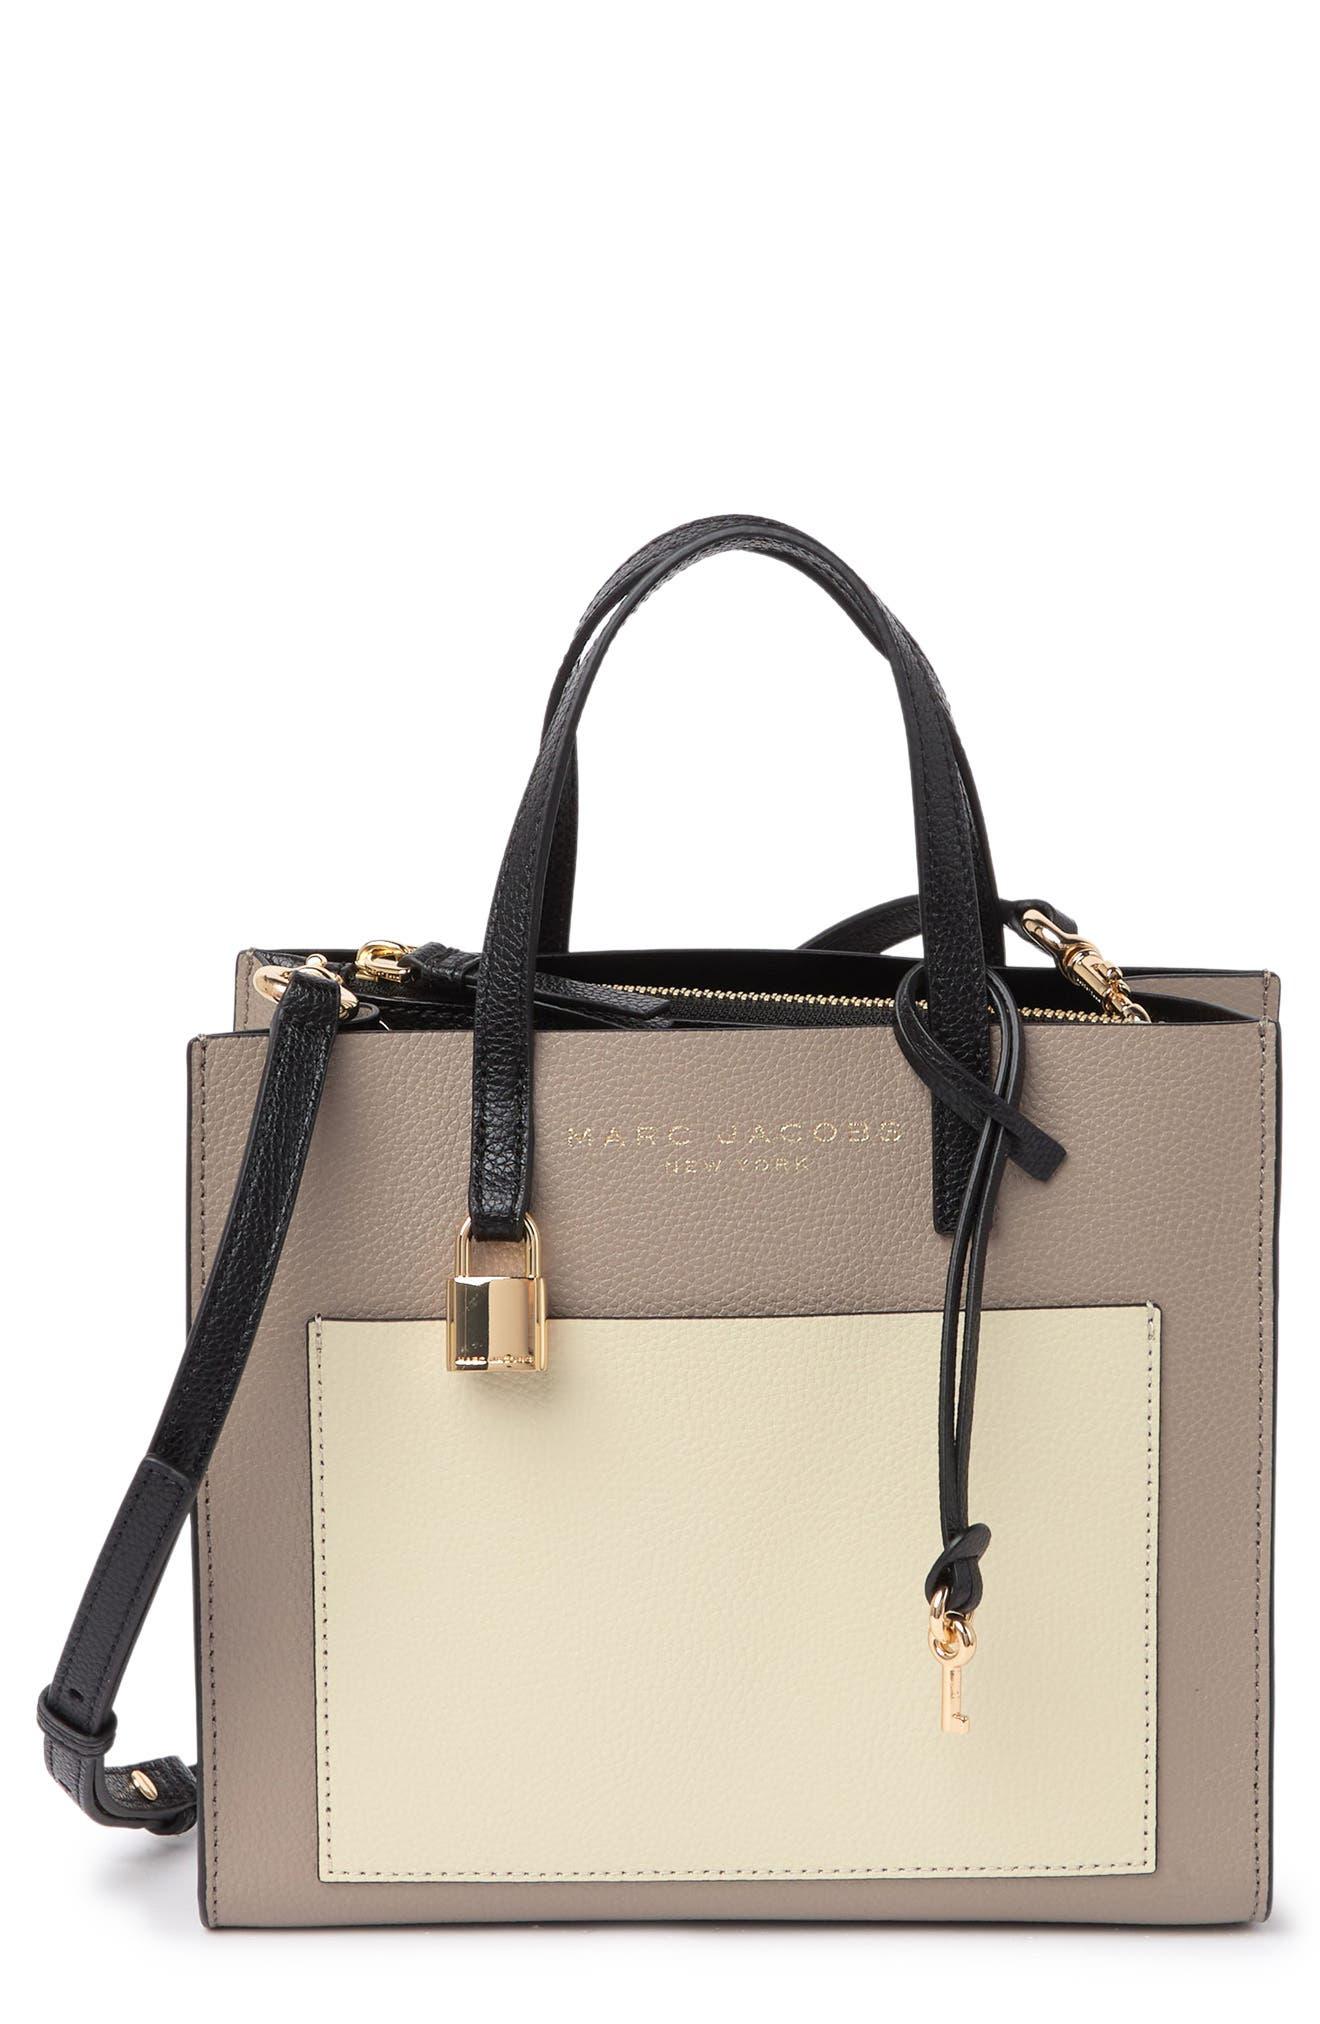 Marc Jacobs The Colorblock Large Tote Bag in Beige Multi